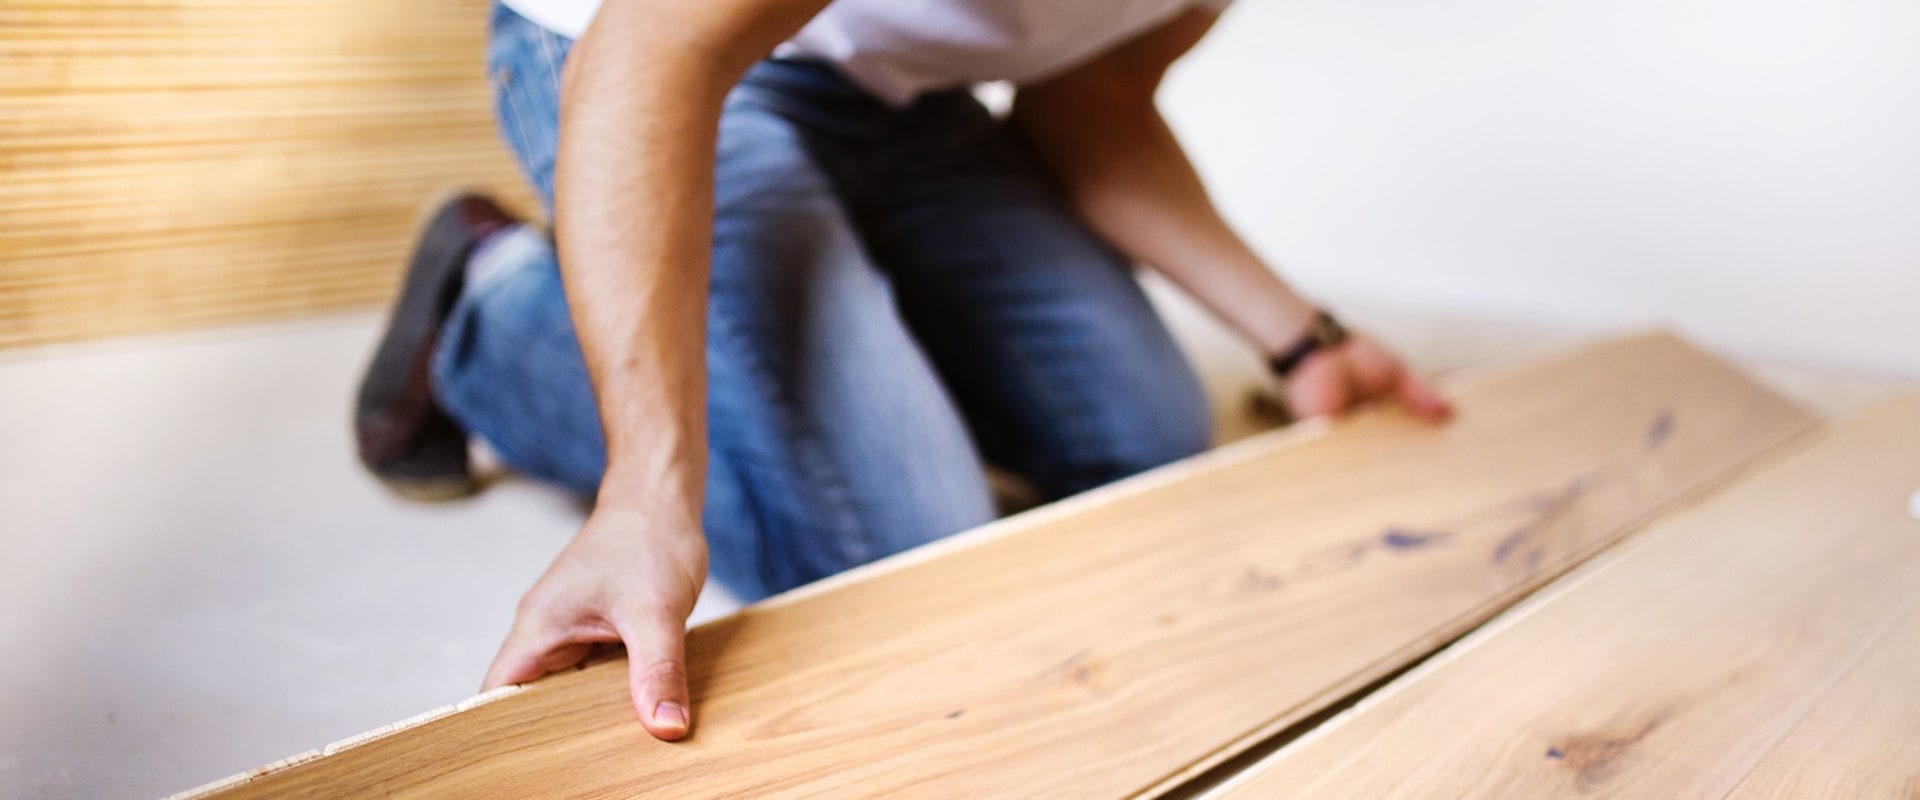 How long does it take a professional to lay laminate flooring?